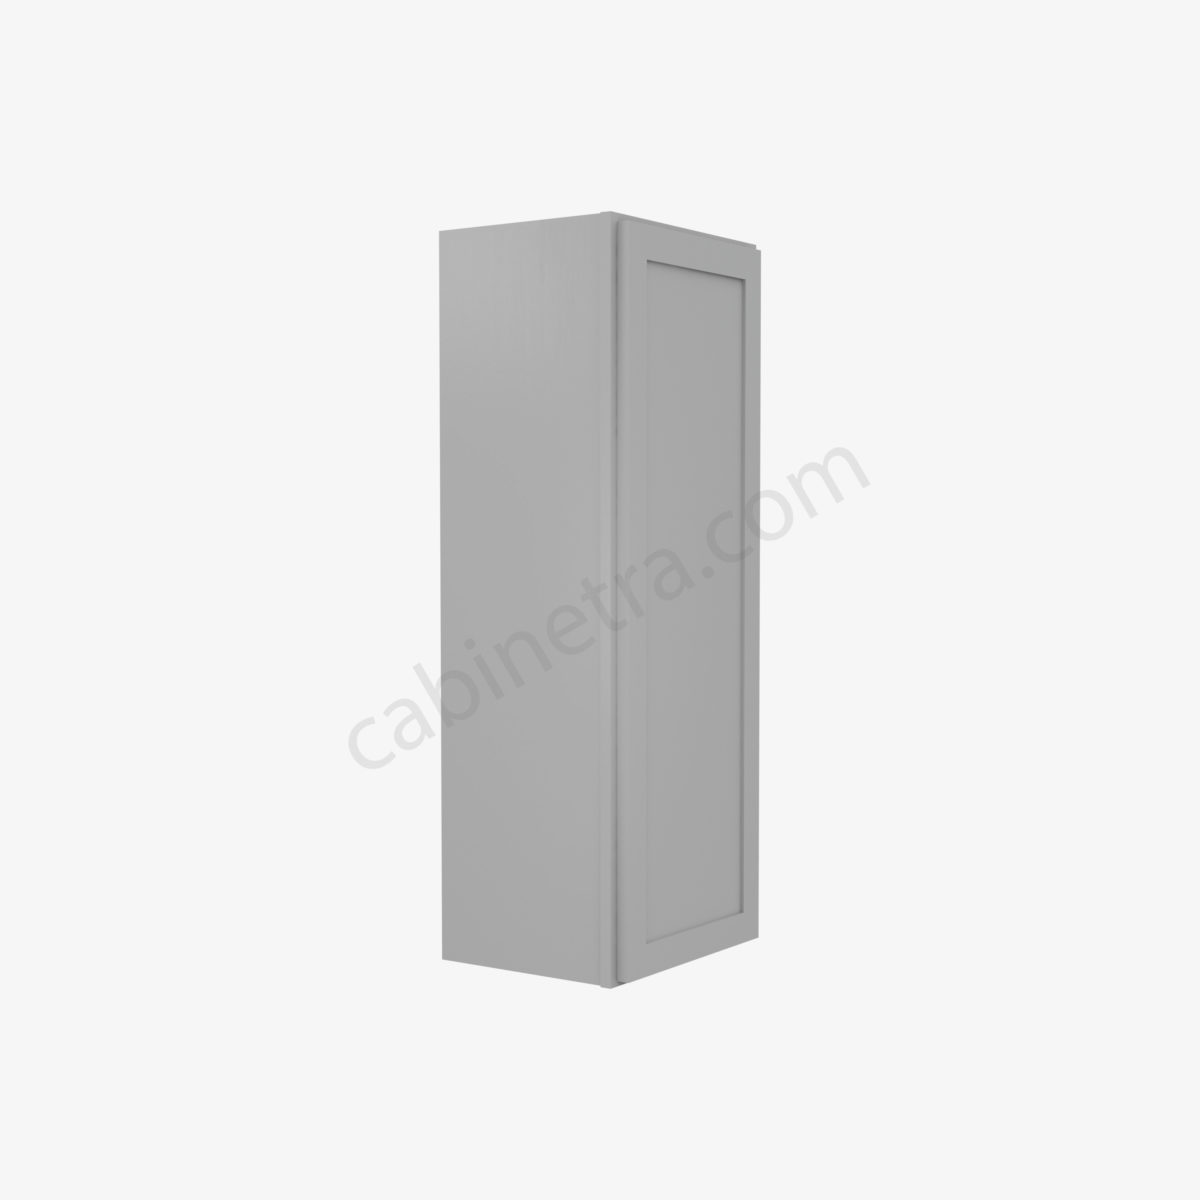 AB W1542 4 Forevermark Lait Gray Shaker Cabinetra scaled